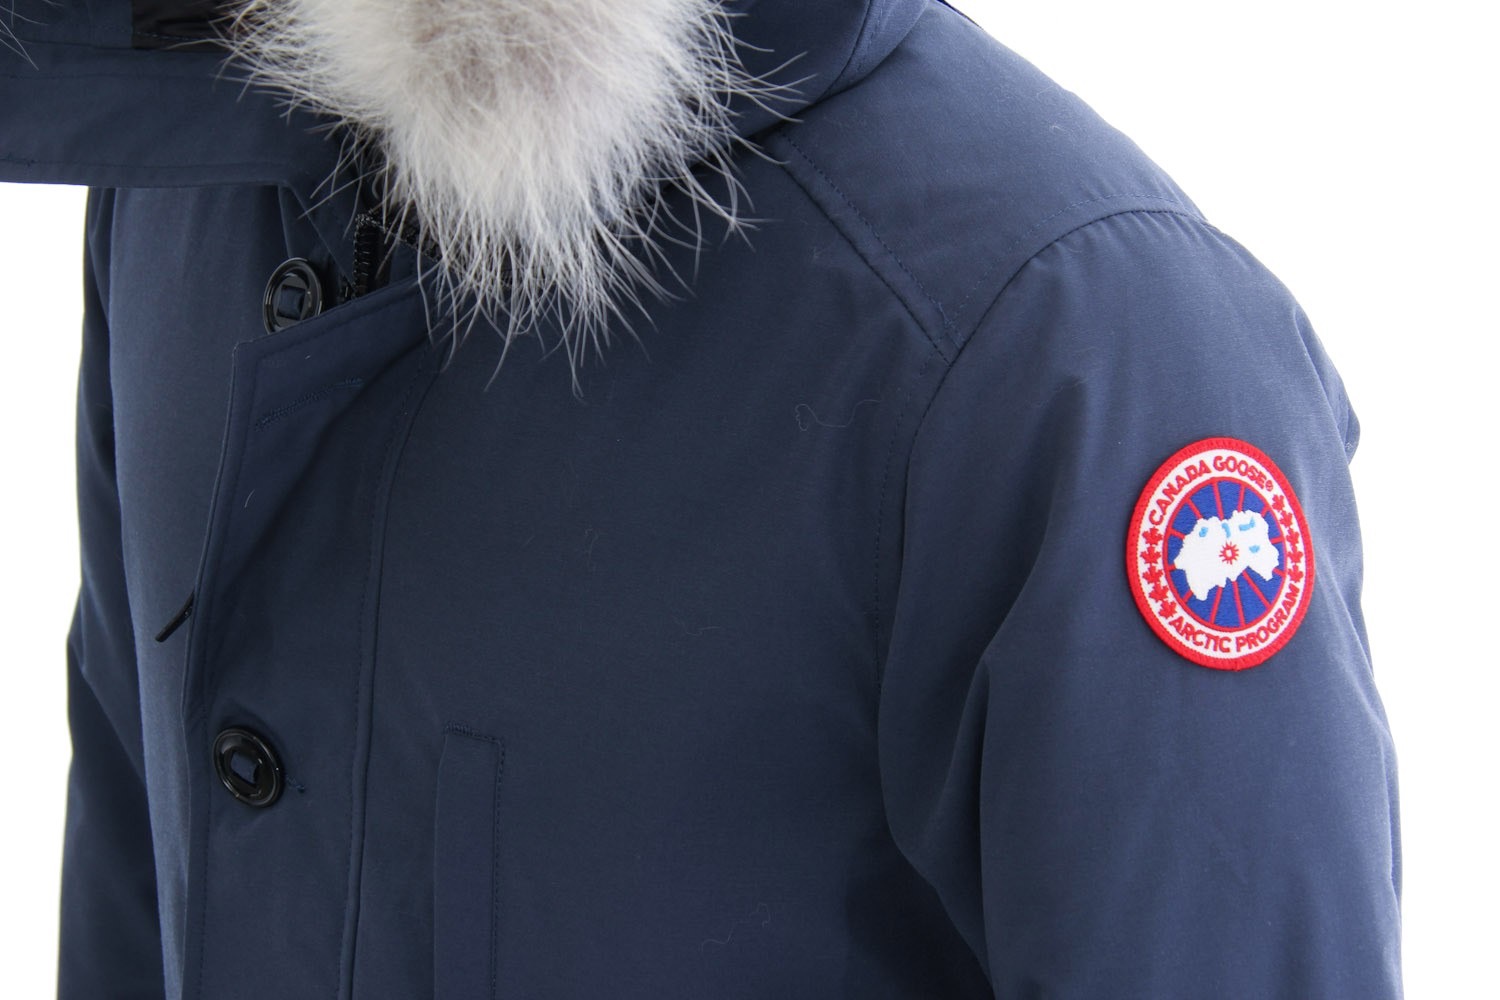 Canada Goose trillium parka outlet shop - My Thoughts on Fur and the Irresponsible Plague of Canada Goose ...